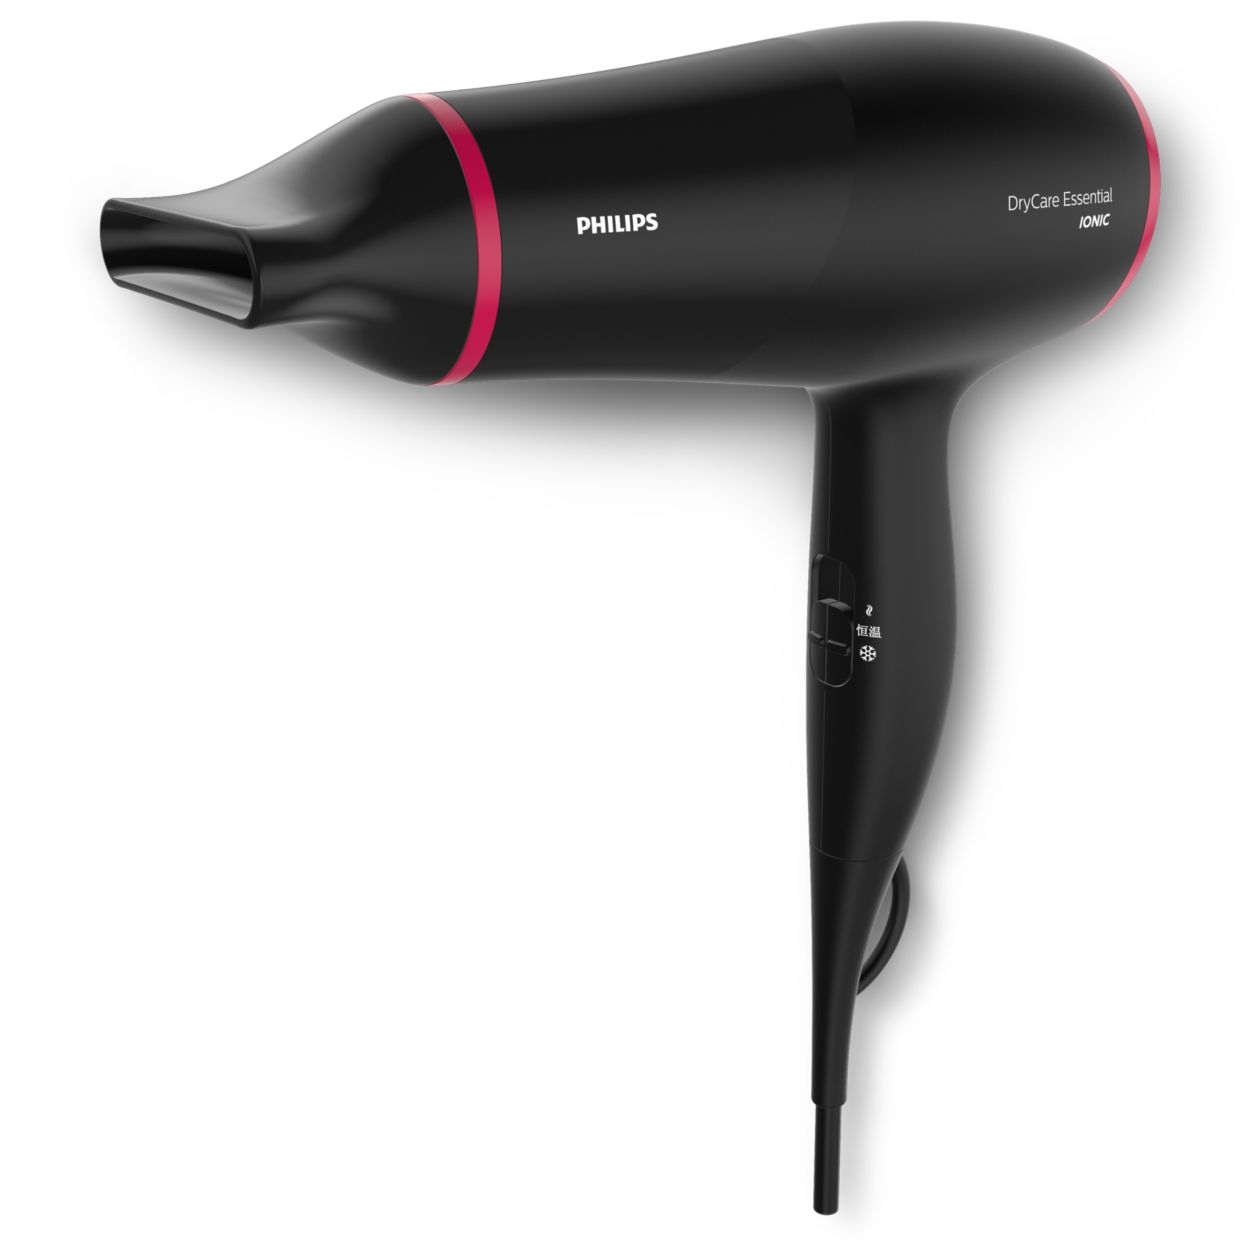 DryCare Essential Energy efficient hairdryer BHD029/09 | Philips